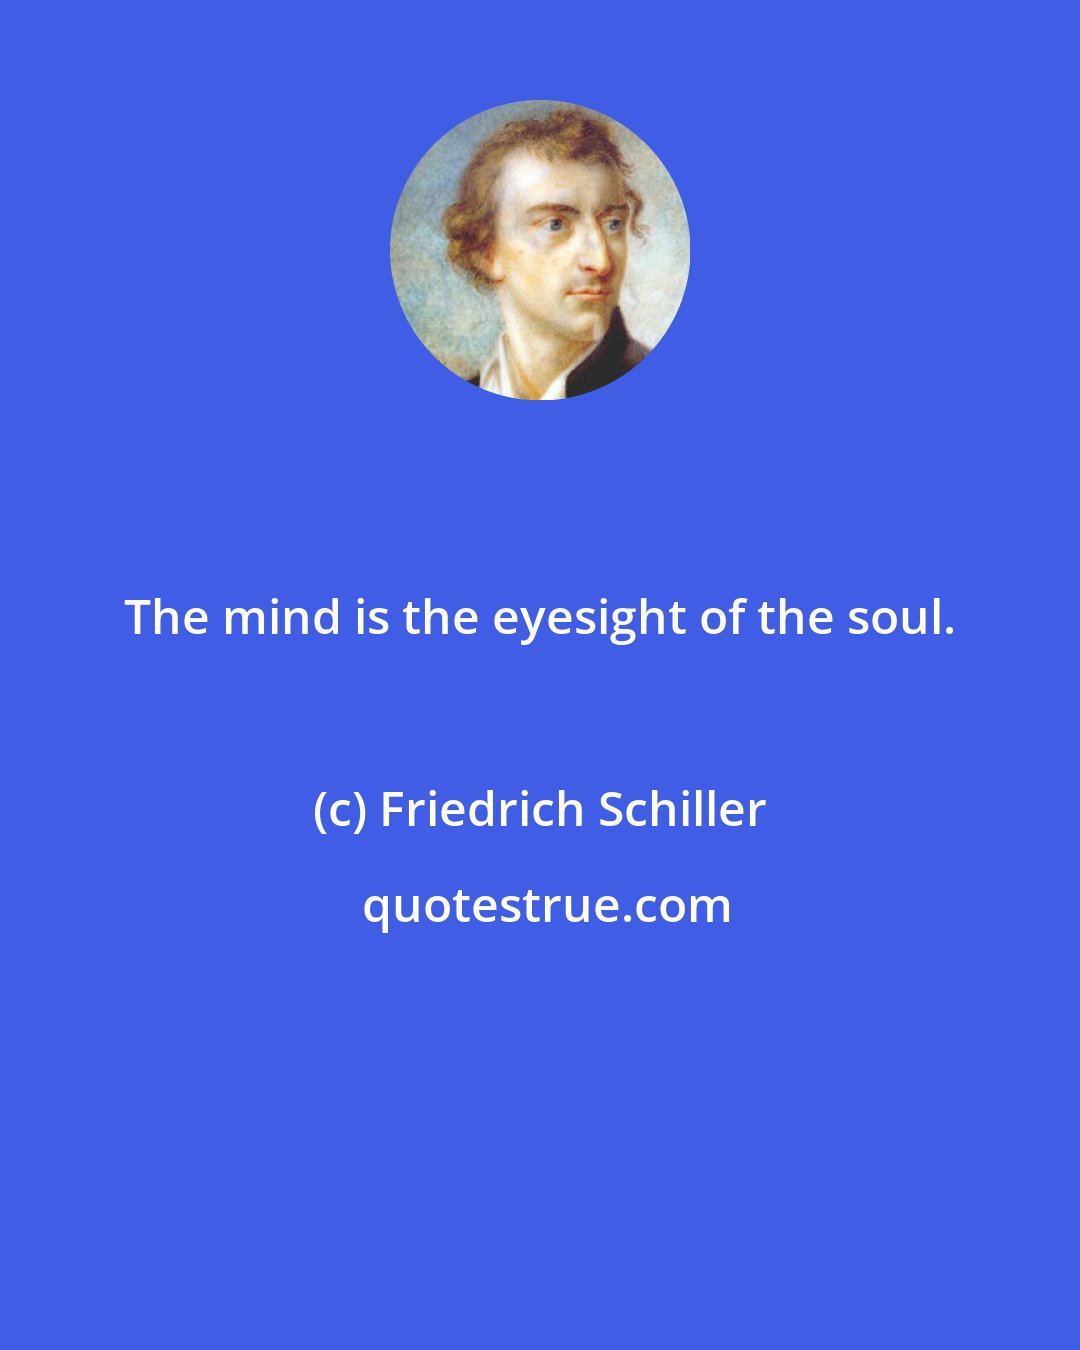 Friedrich Schiller: The mind is the eyesight of the soul.